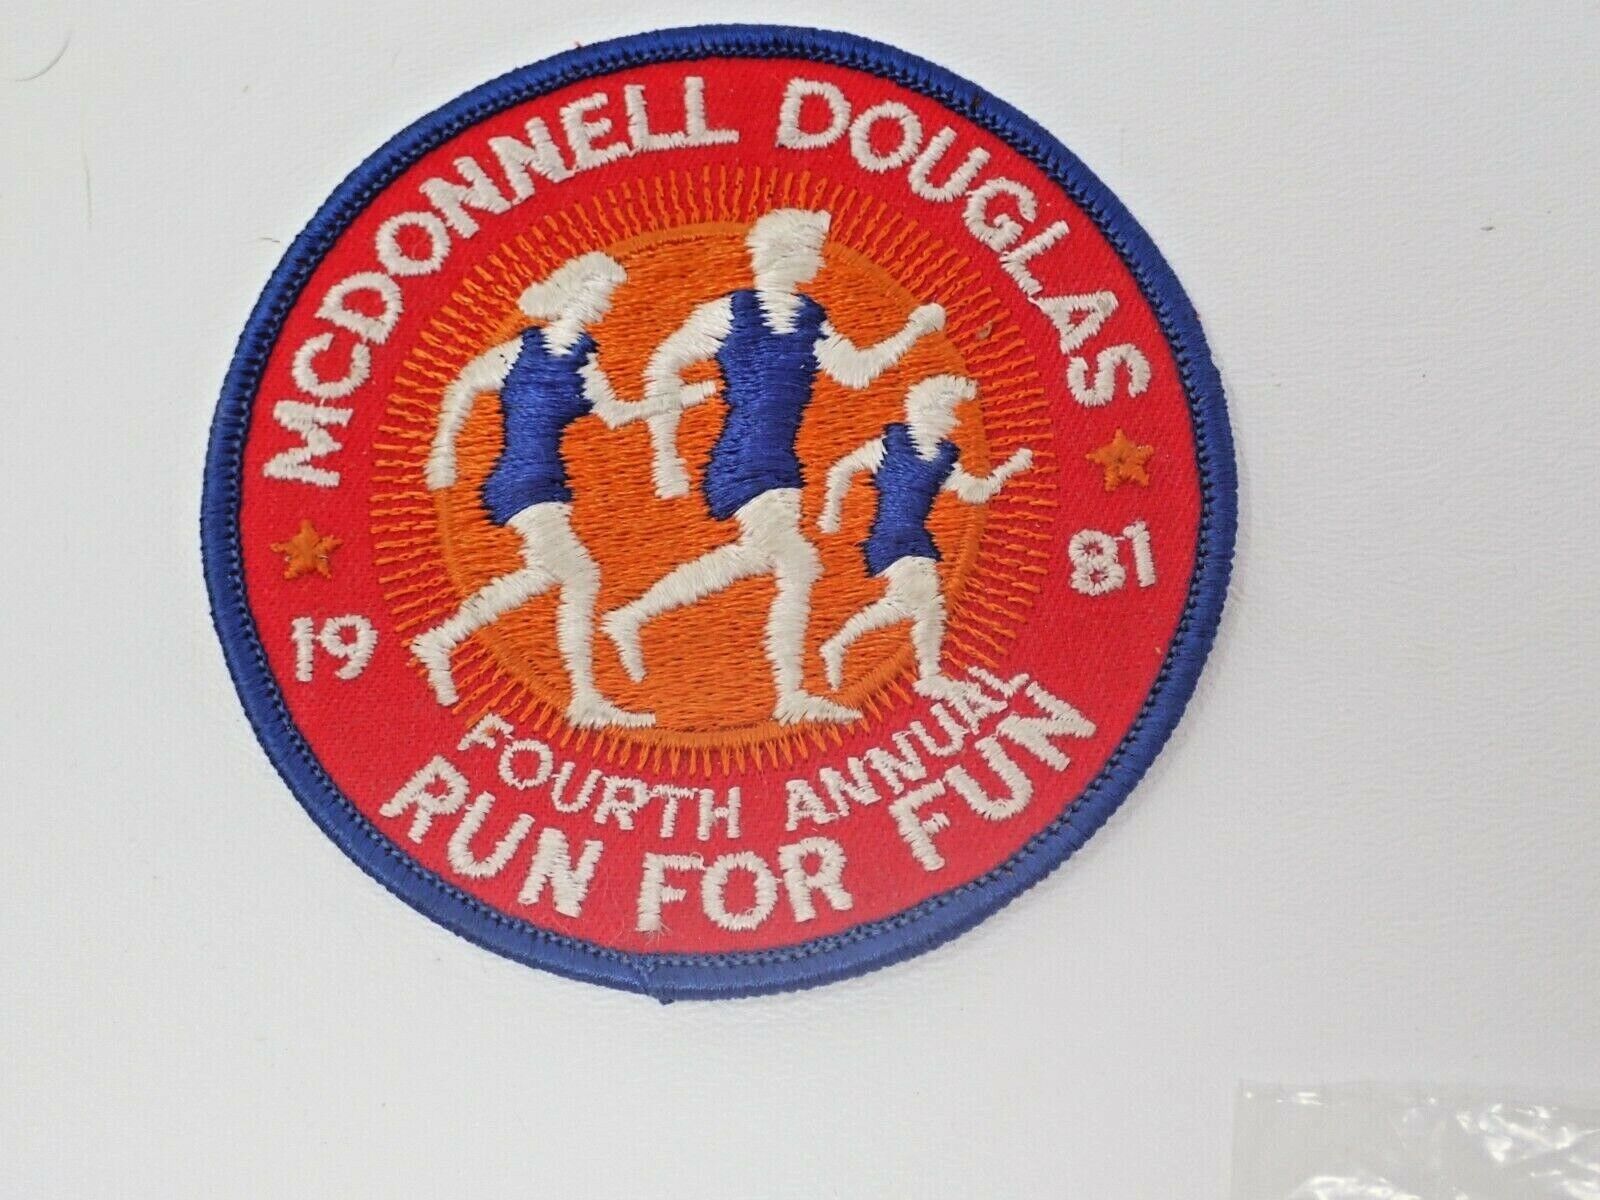 McDonnell Douglas Fourth Annual Run for Fun Large Embroidered Patch Vintage 1981